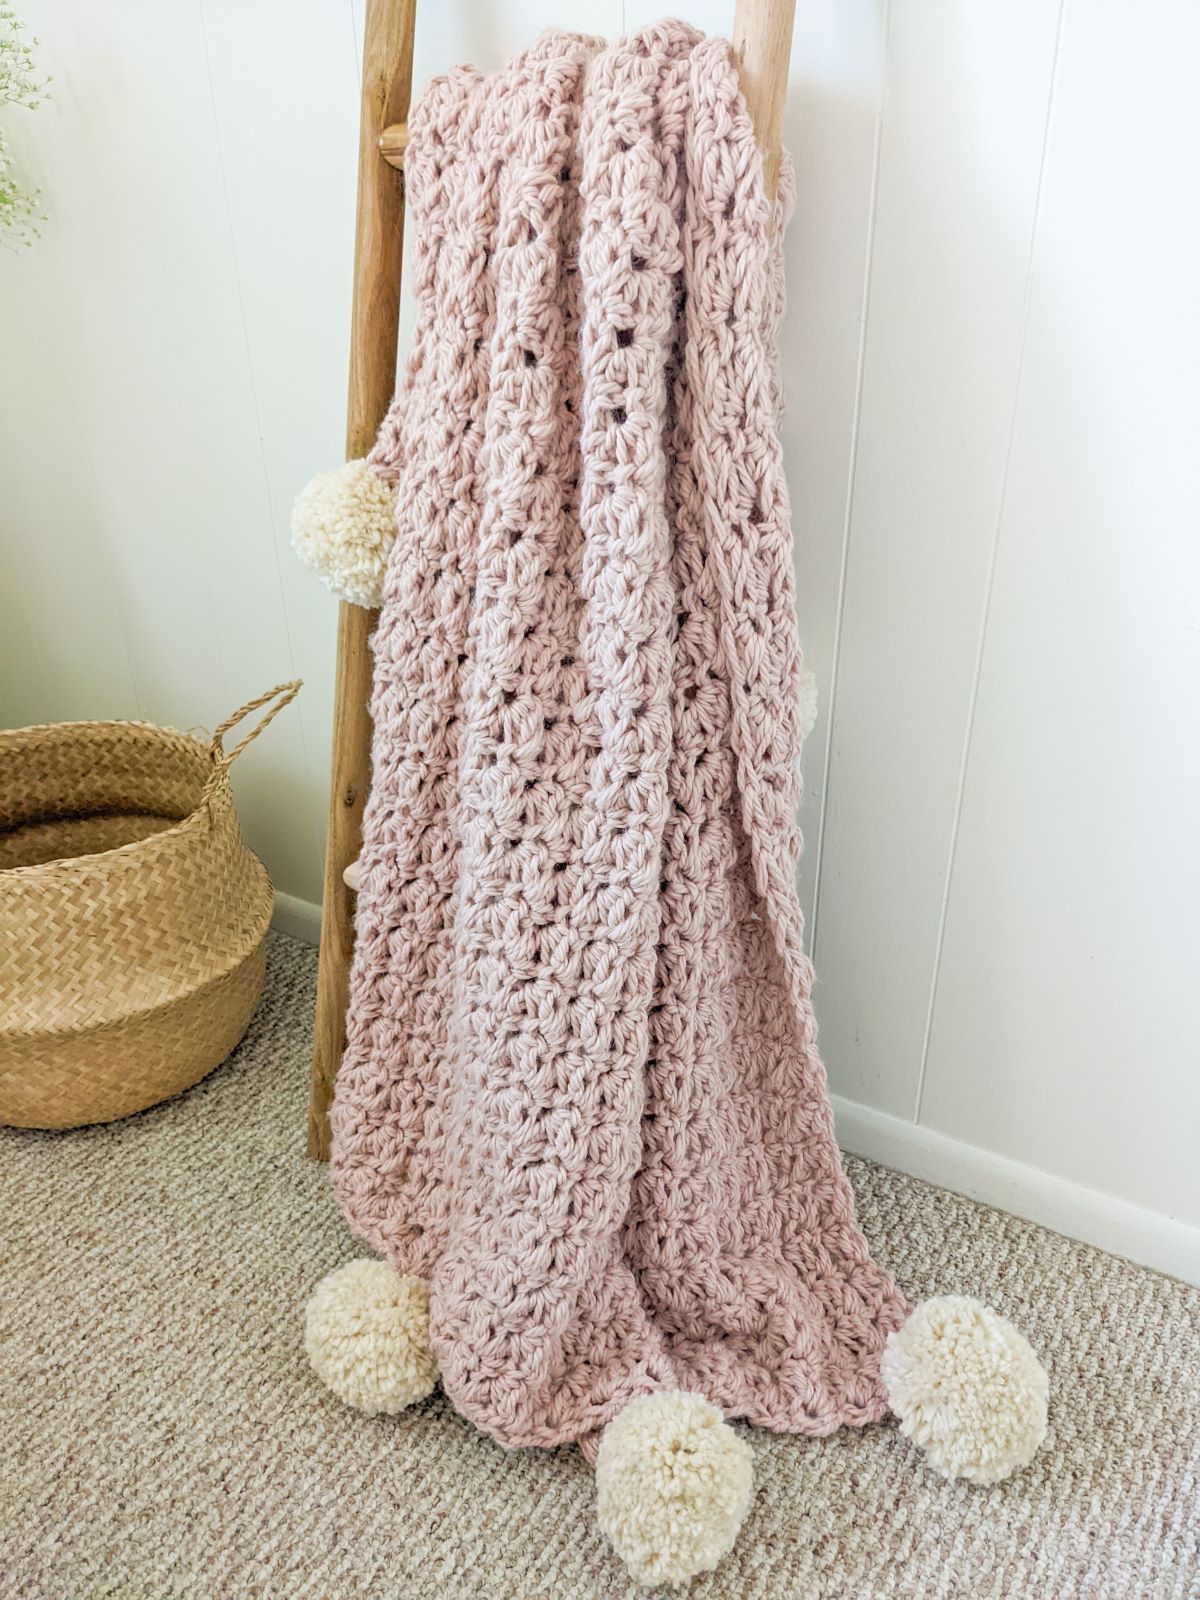 A light pink bulky weight crochet blanket on a decorative ladder with a belly basket.